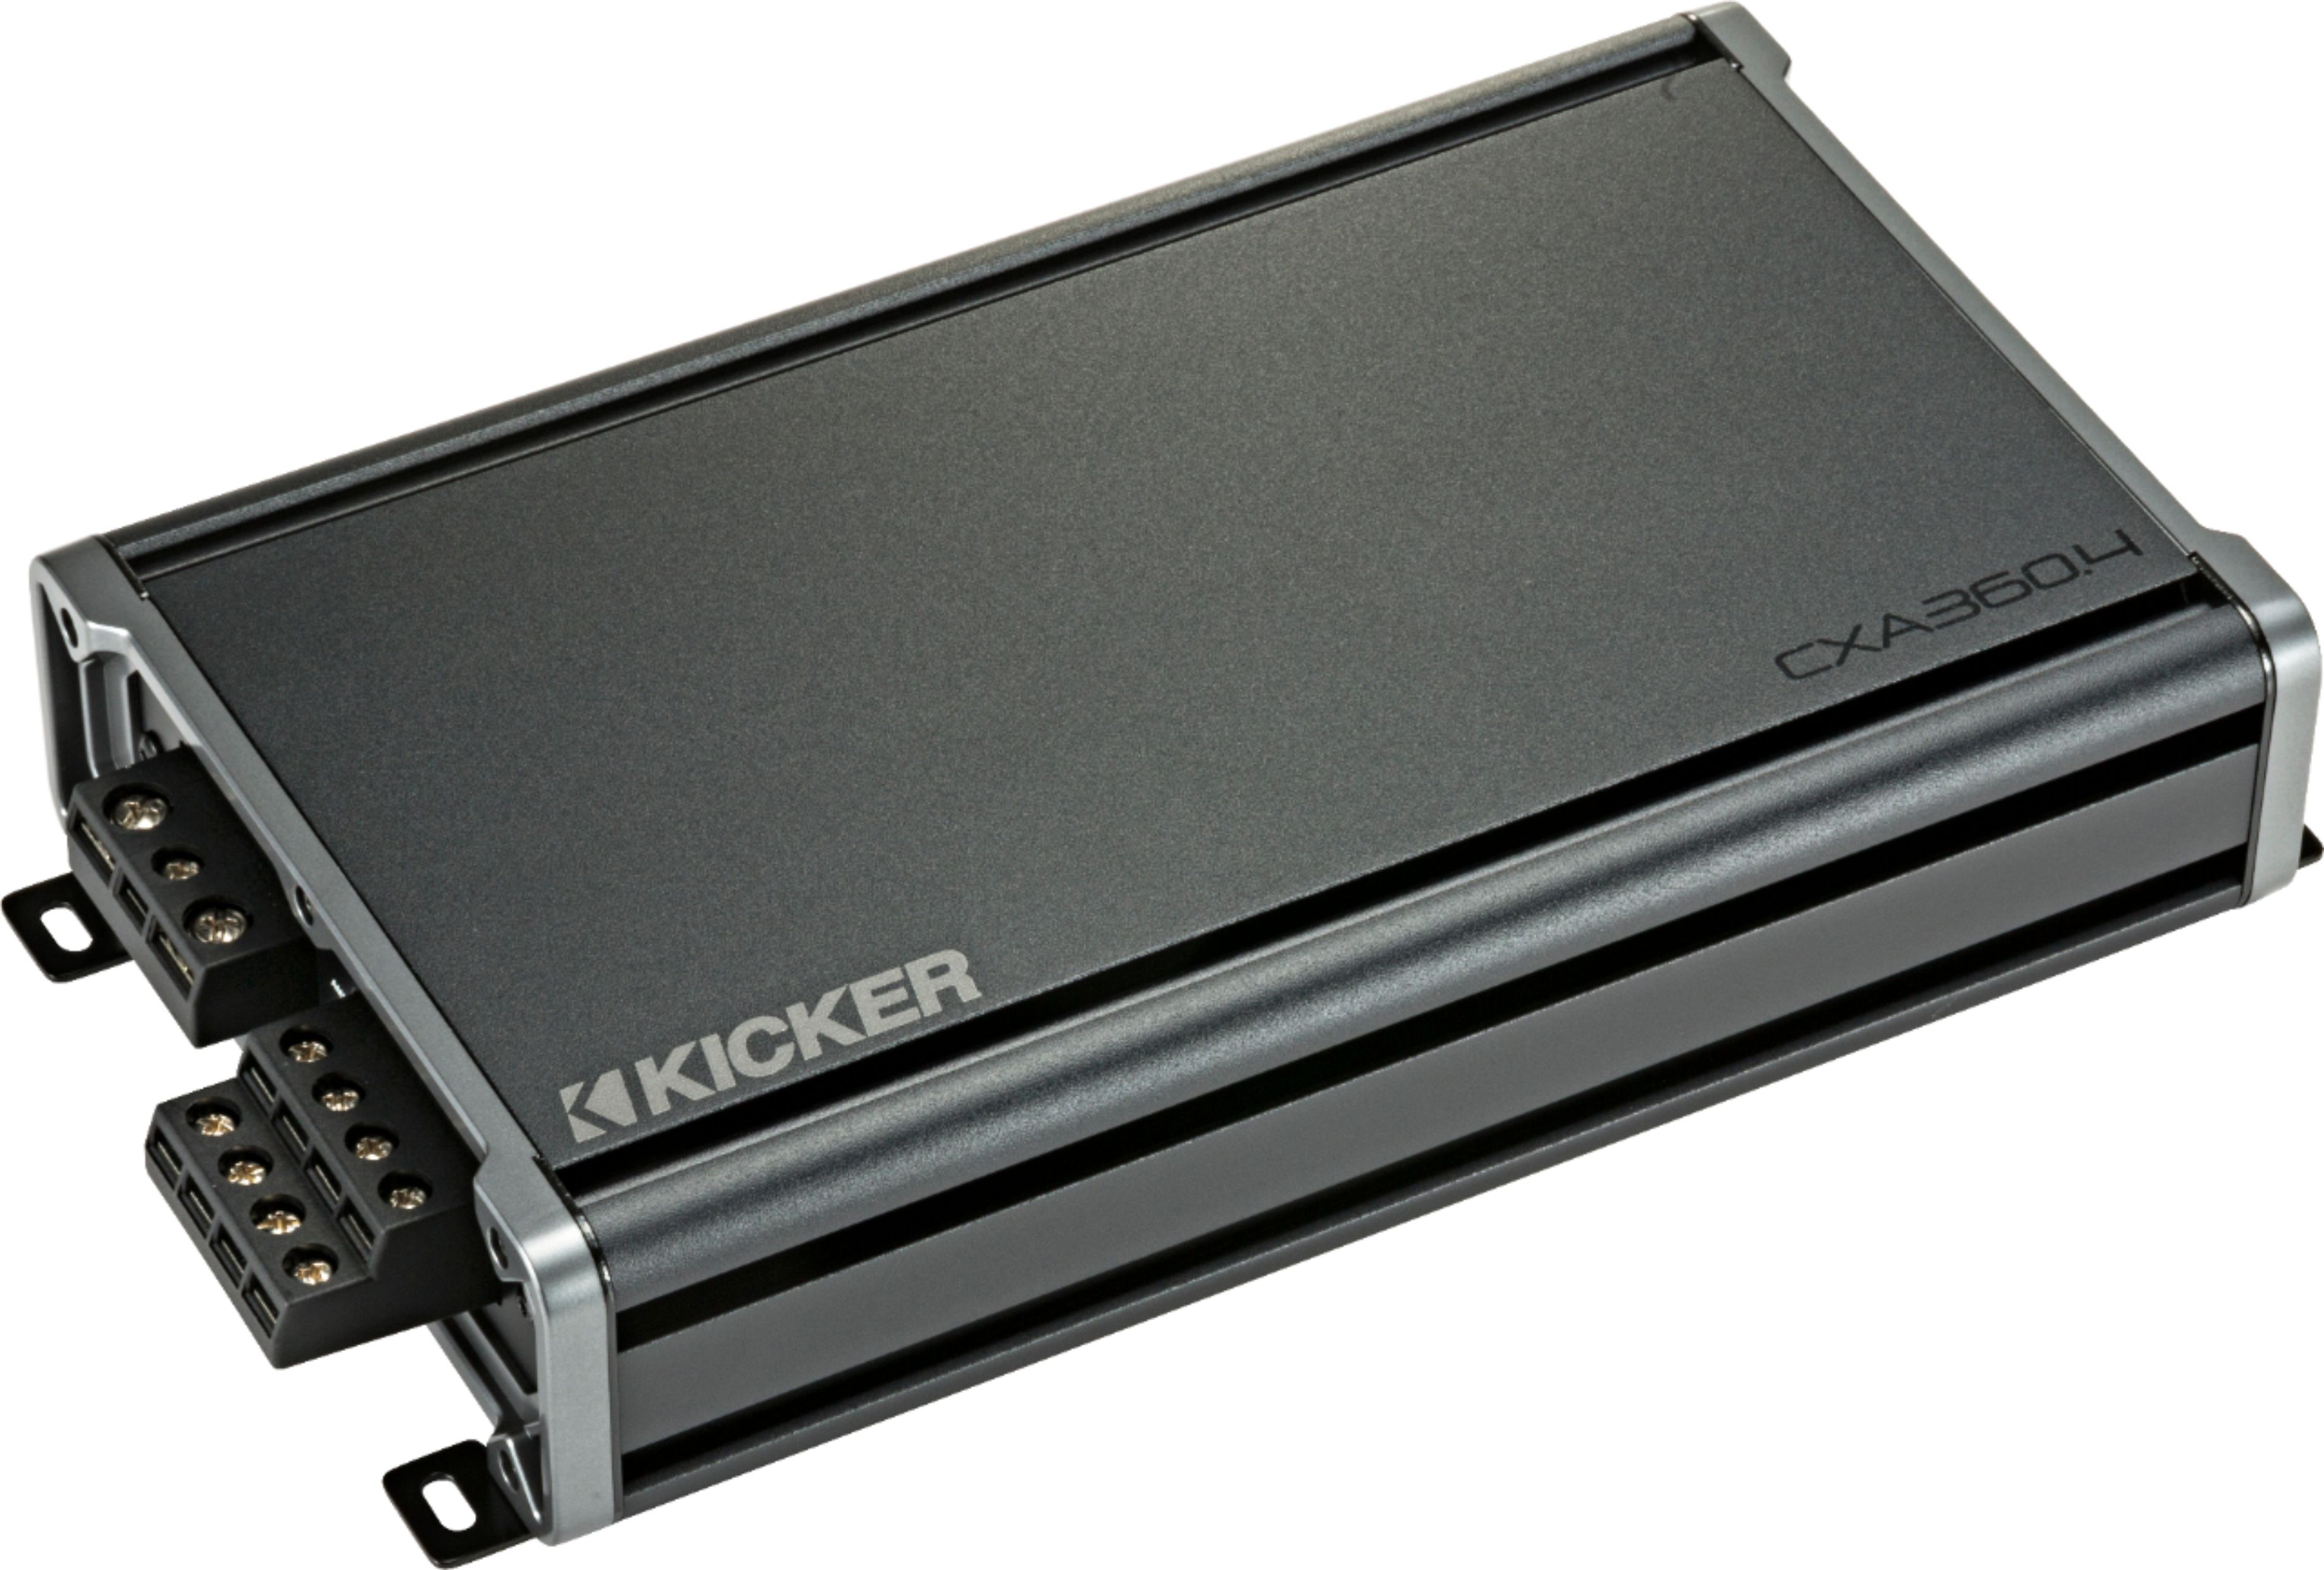 Angle View: KICKER - CX 360W Class AB Bridgeable Multichannel Amplifier with Variable Crossovers - Black